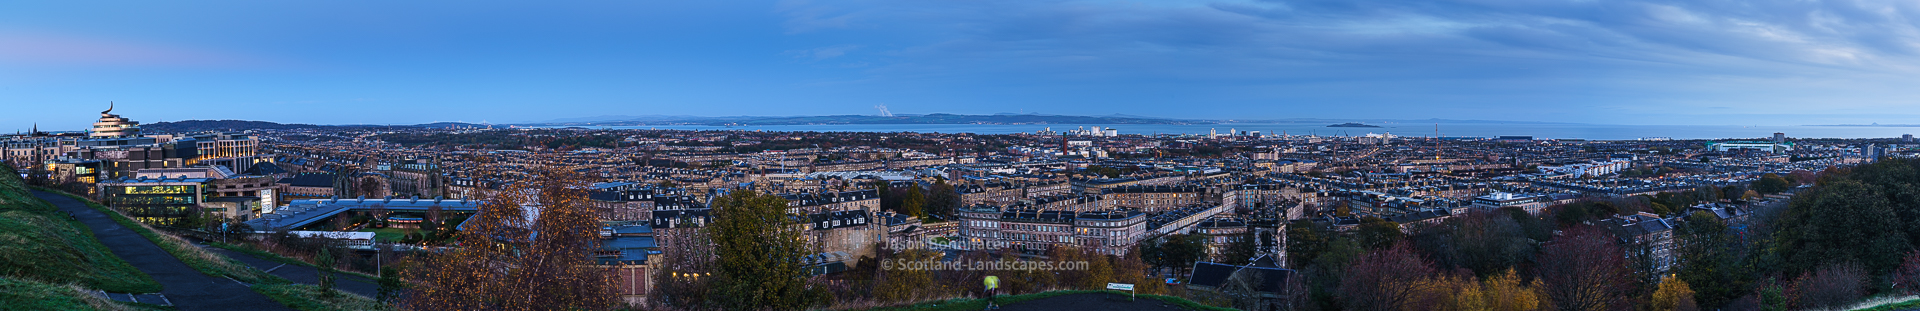 A 180 degree panorama northwards from Calton Hill over the New Town, Granton, Leith and the Firth of Forth, Edinburgh and The Lothians